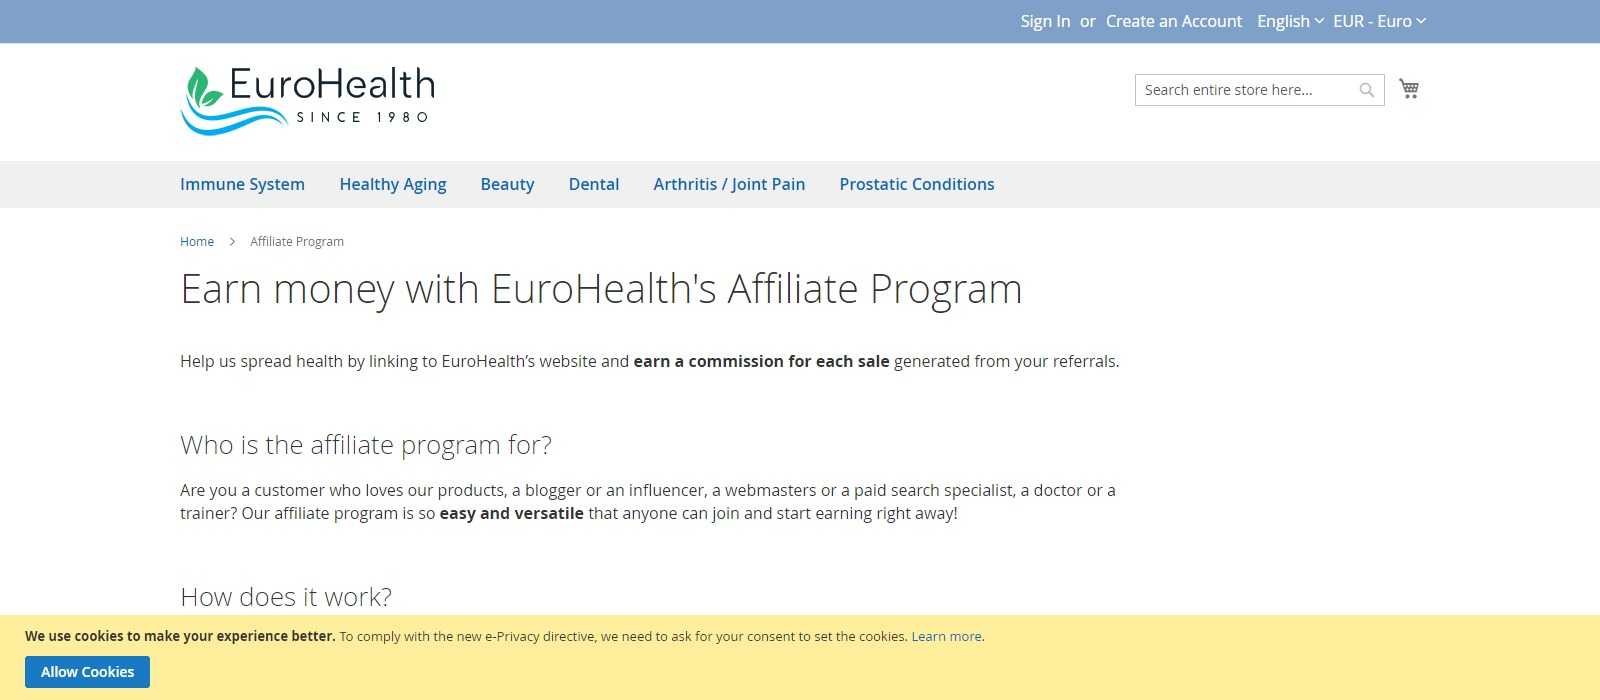 EuroHealth Affiliate Program Review: Project 10% (and more) commission on Each Sale